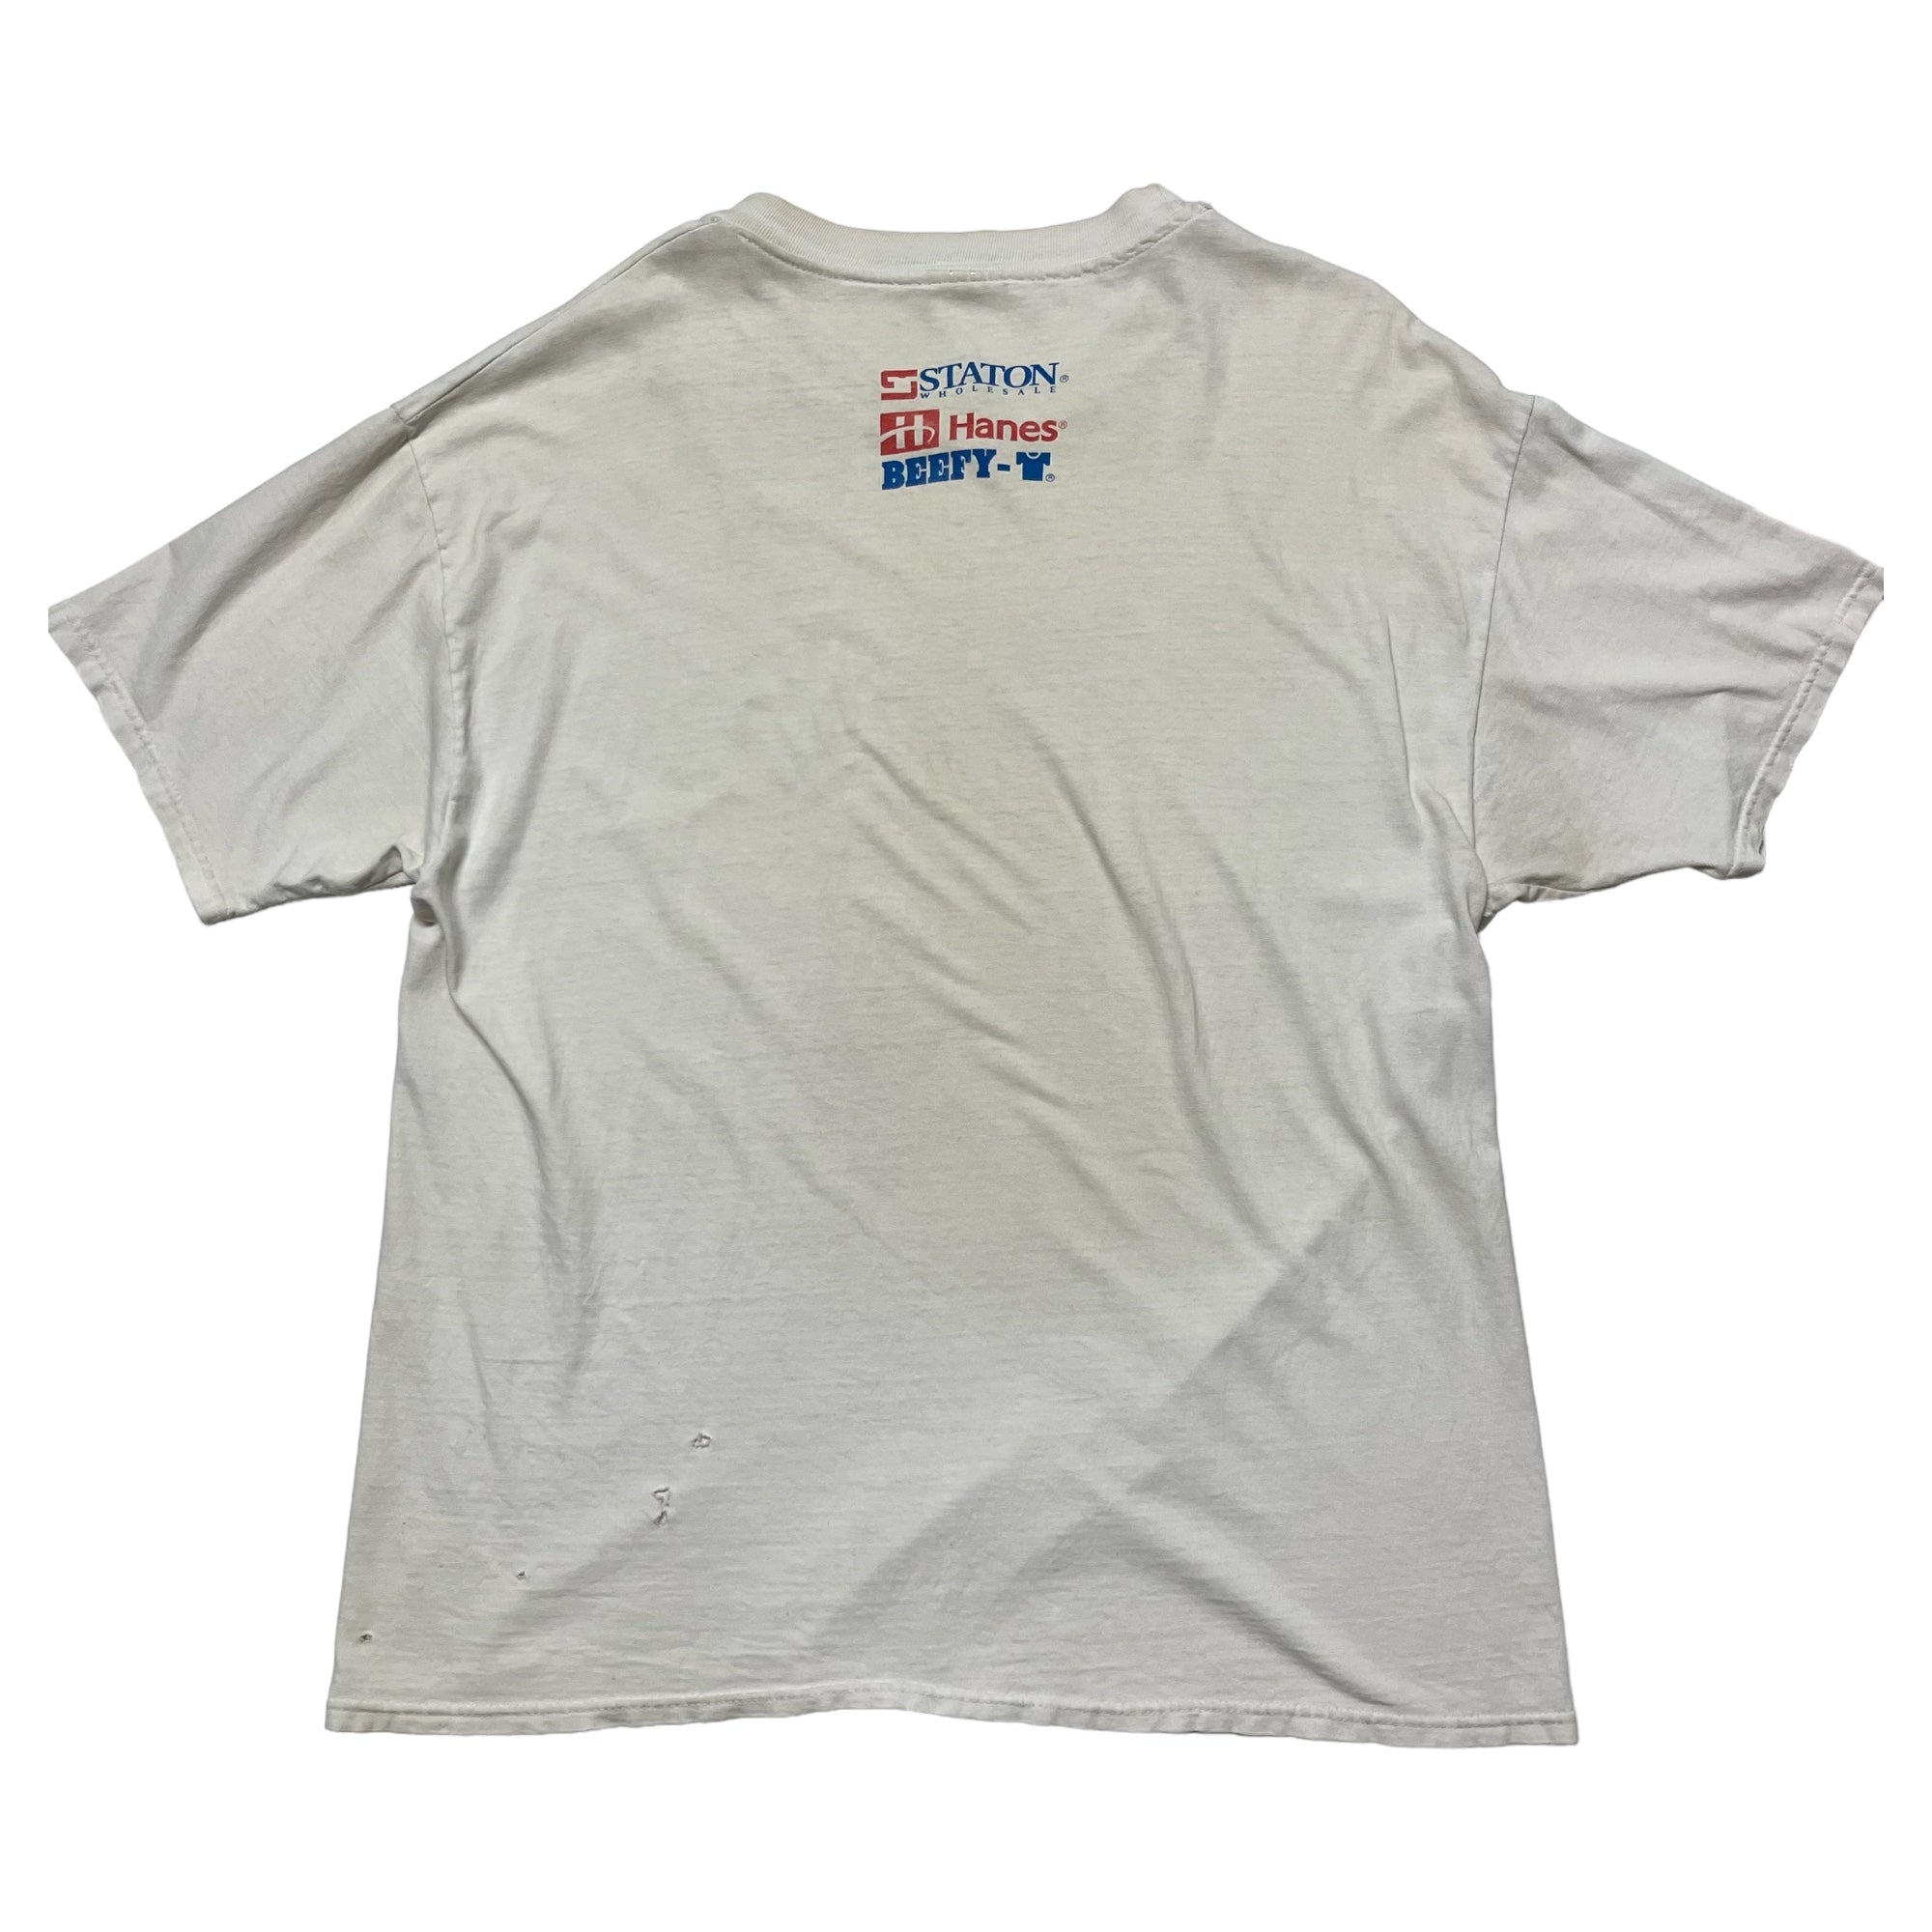 ‘90s Hanes Beefy-T ‘Luxuriously Soft Hand’ Promo T-Shirt - White - XL